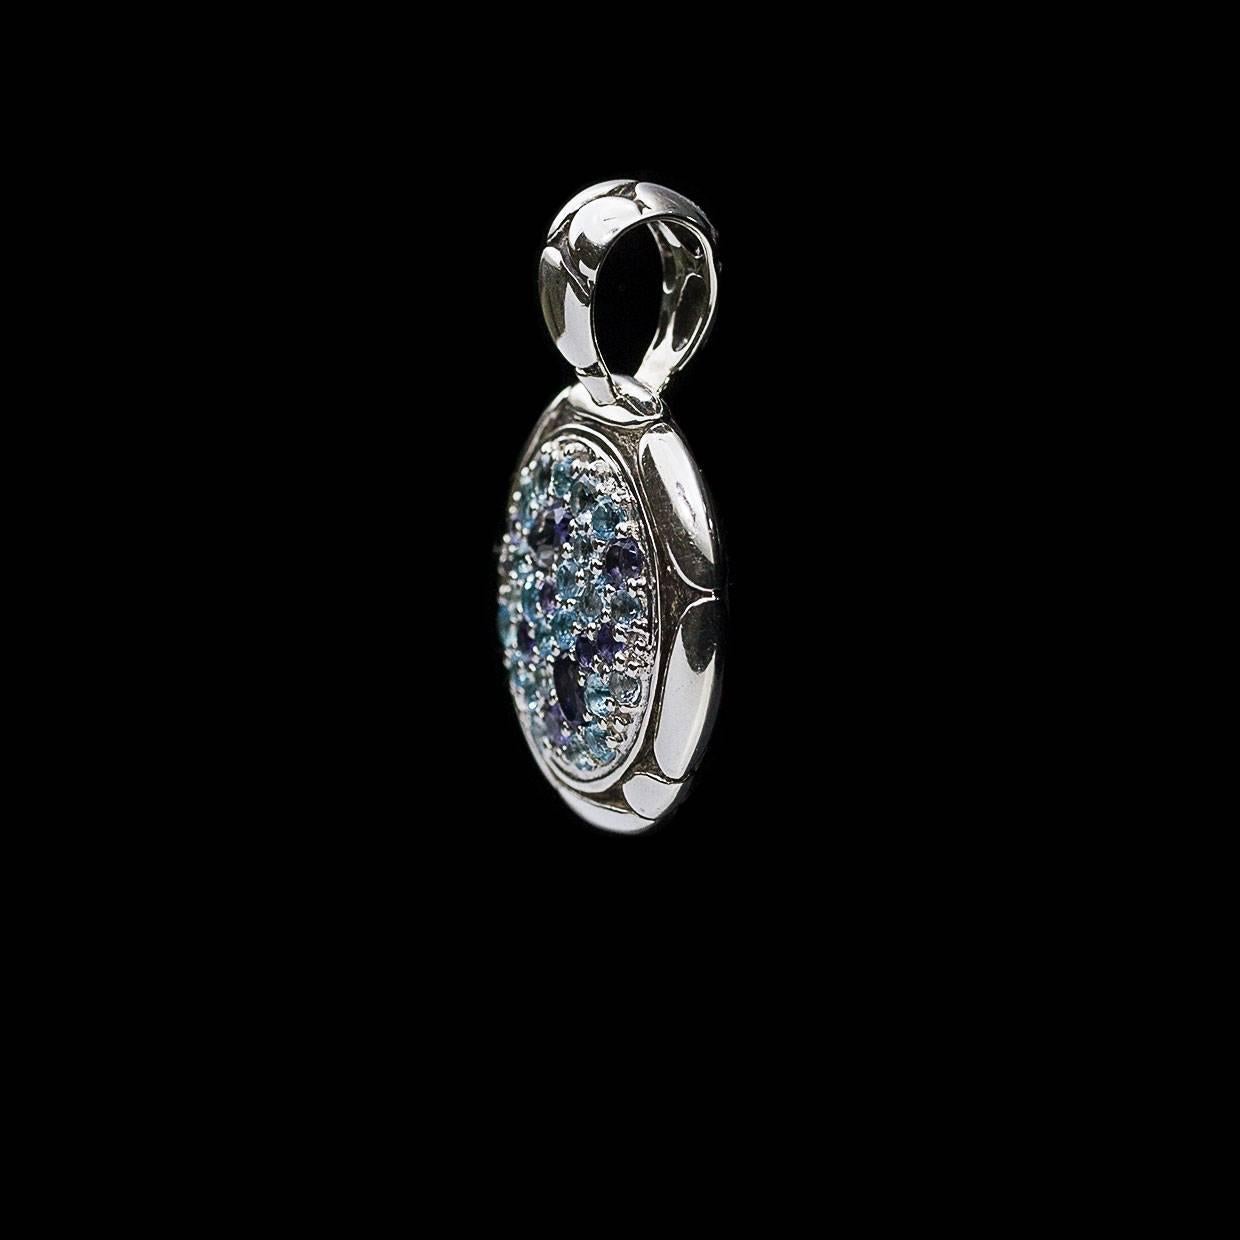 Each piece of John Hardy jewelry has been crafted in Bali since 1975. John Hardy is dedicated to creating timeless one-of-a-kind pieces that are brilliantly alive.

This sterling silver pendant is from John Hardy's Kali Lavafire collection. This